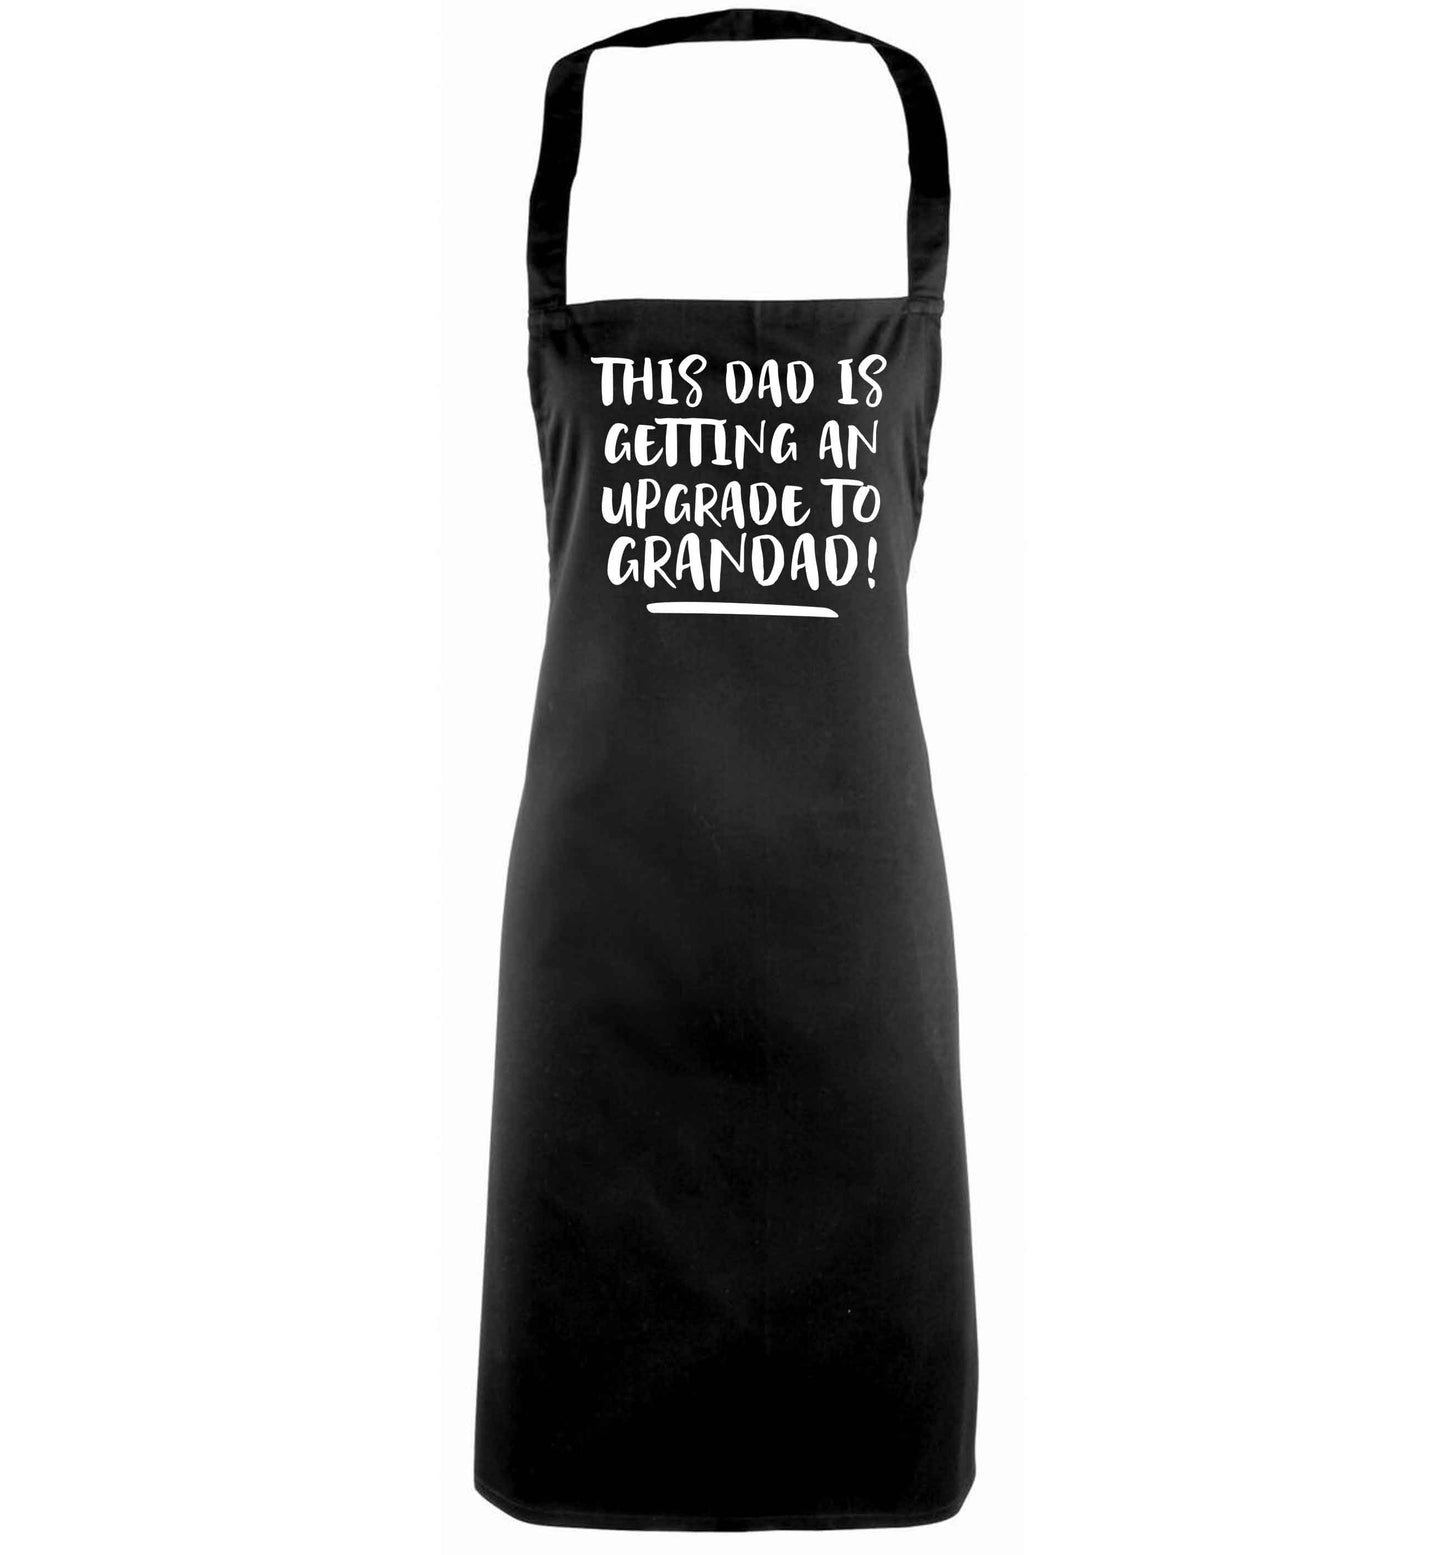 This dad is getting an upgrade to grandad! black apron